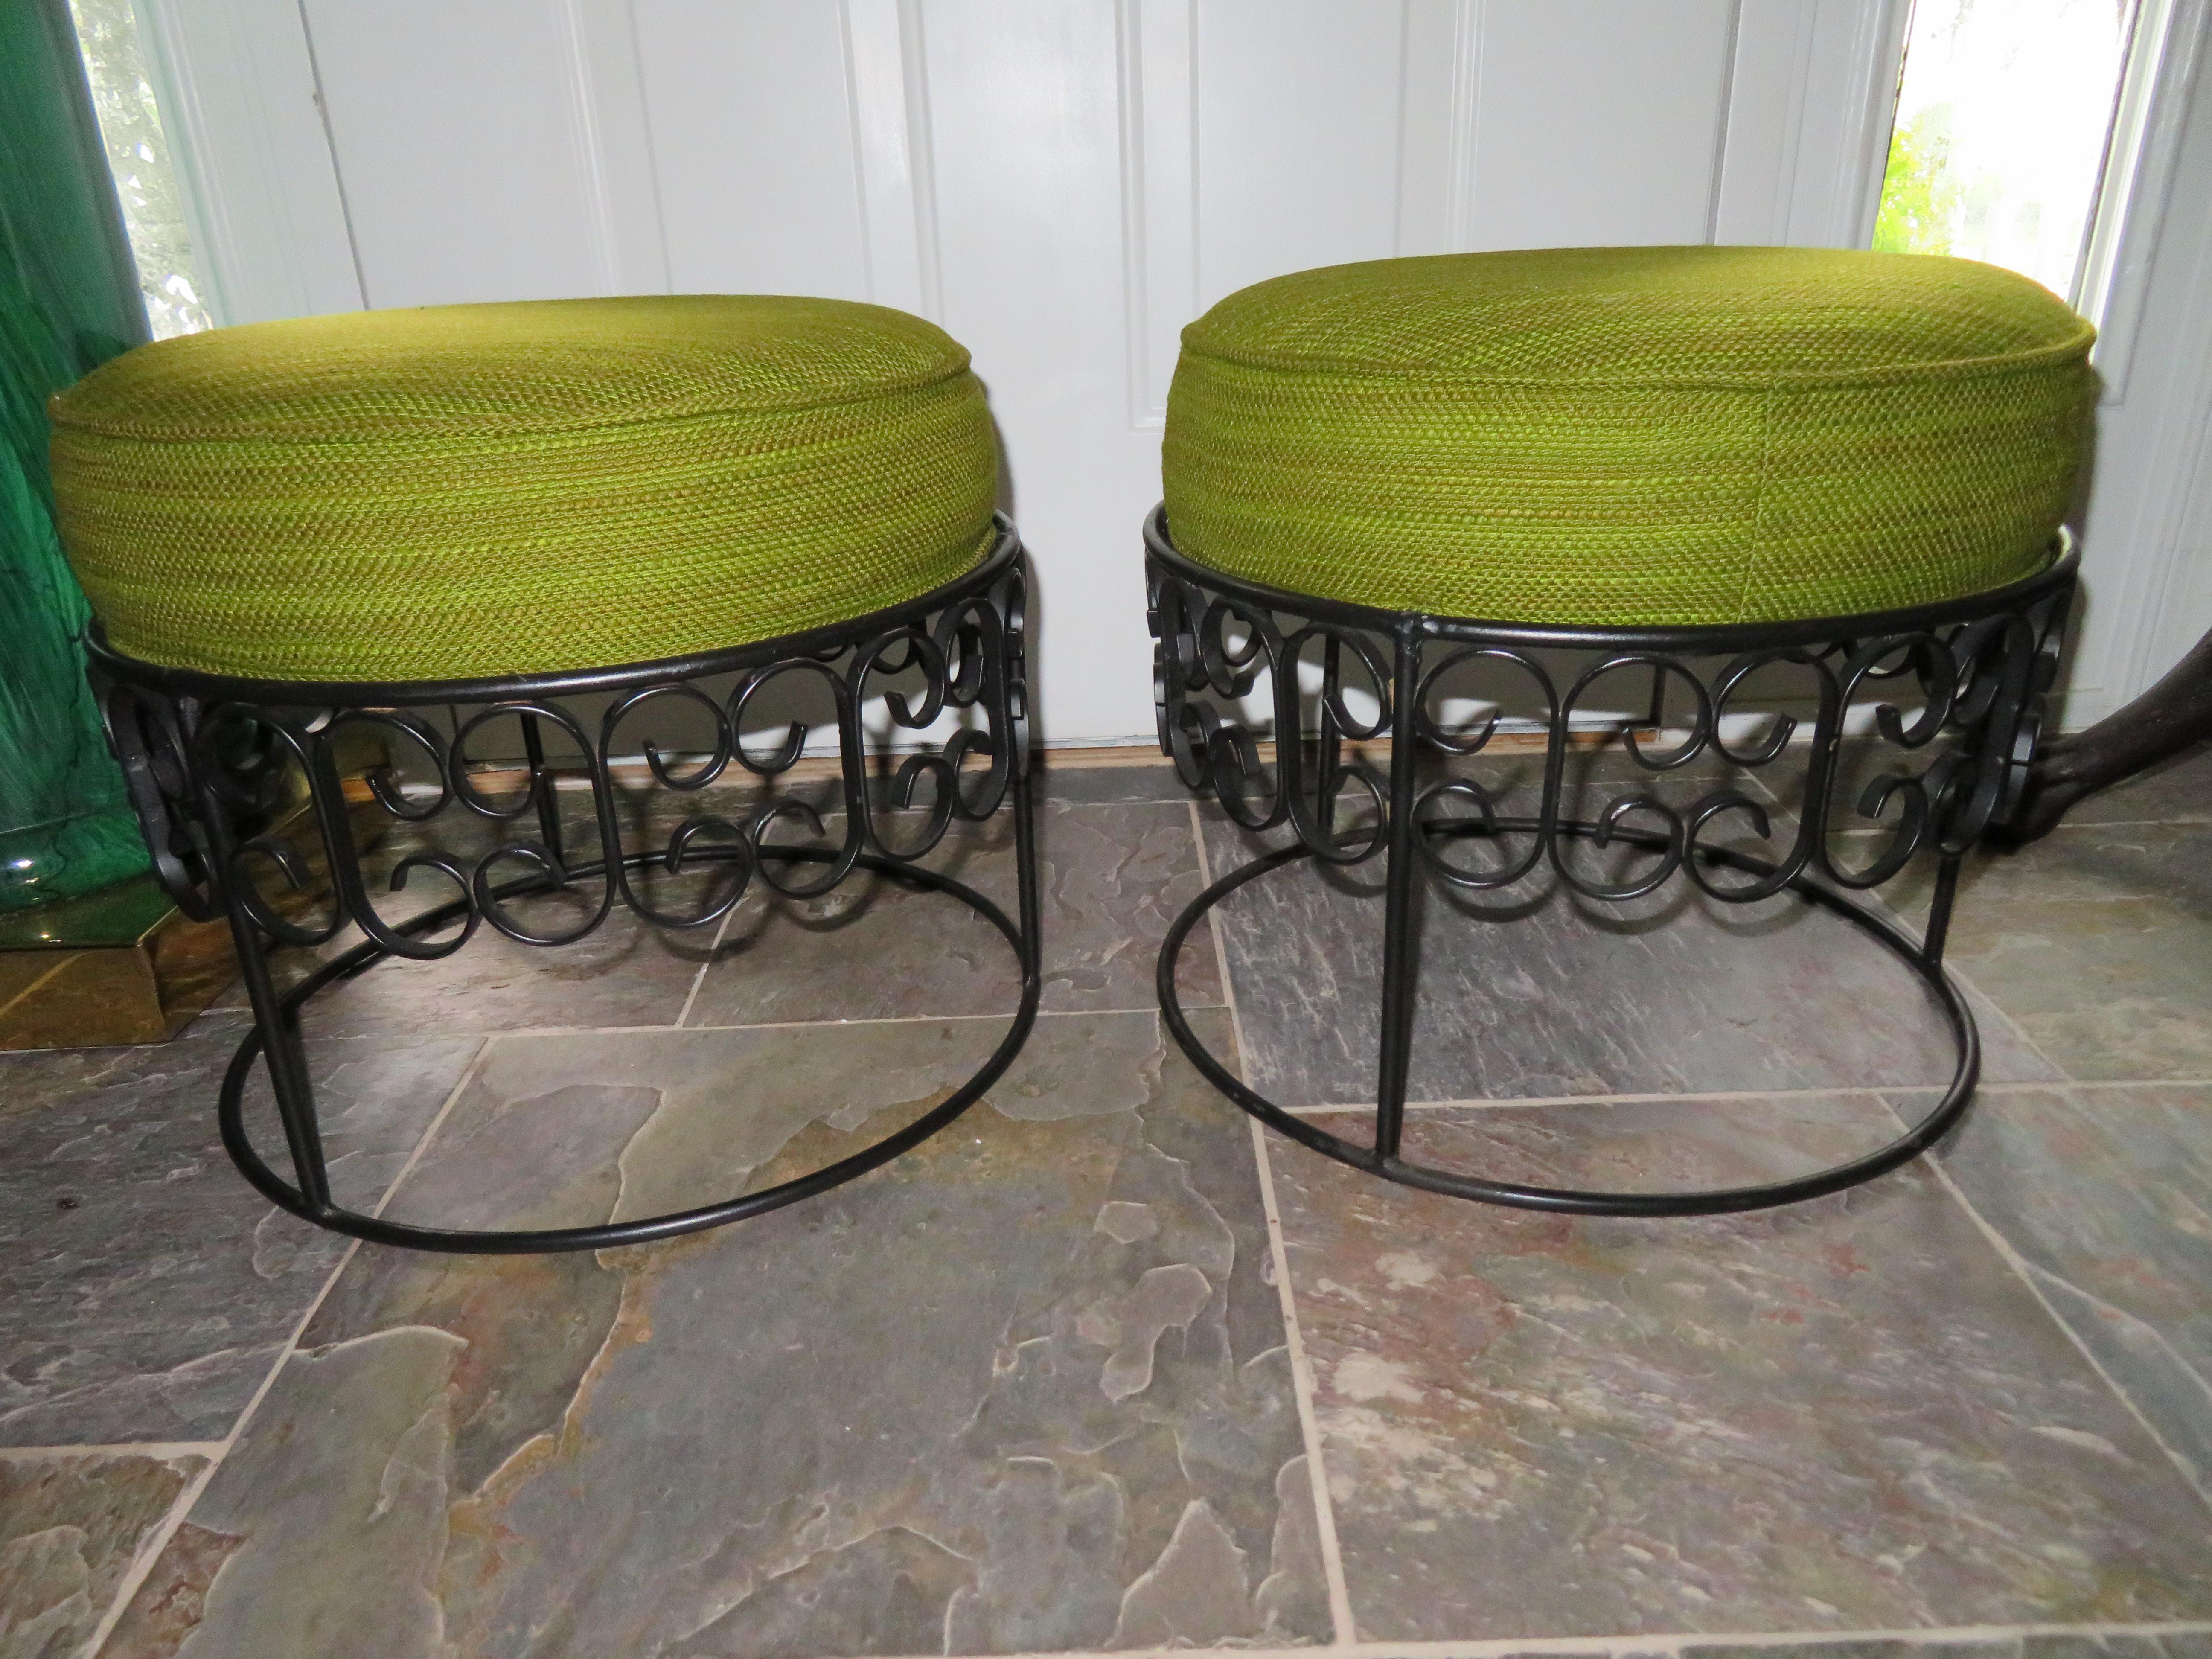 Wonderful pair of Arthur Umanoff stacking stools from the 1964 Grenada Collection for Boyuer Scott, Shaver Howard collections. This pair is in wonderful vintage condition with a lovely lime green lightly ribbed wool fabric and black painted iron